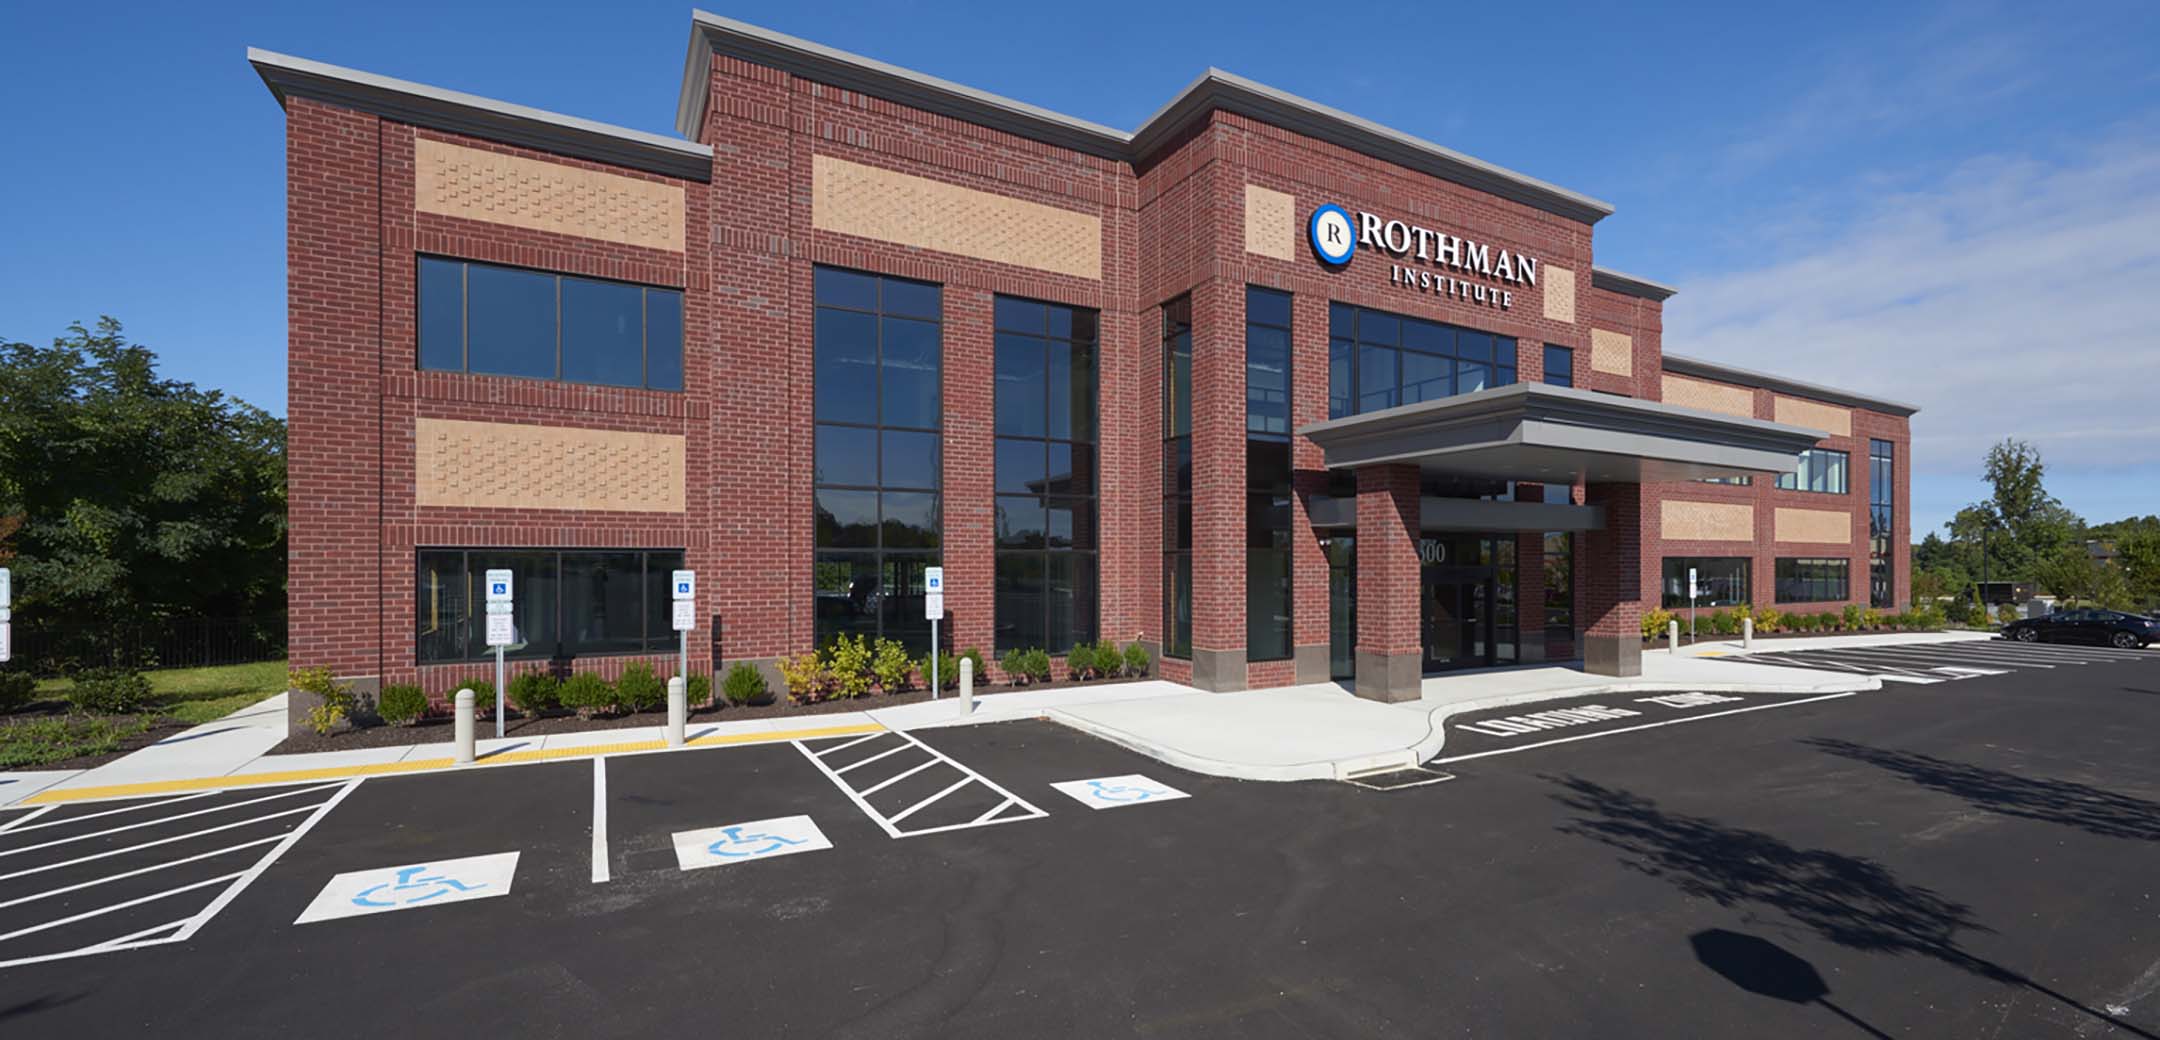 An angled view of the Rothman Brinton Lakes red brick building showcasing the front parking lot and main entrance.